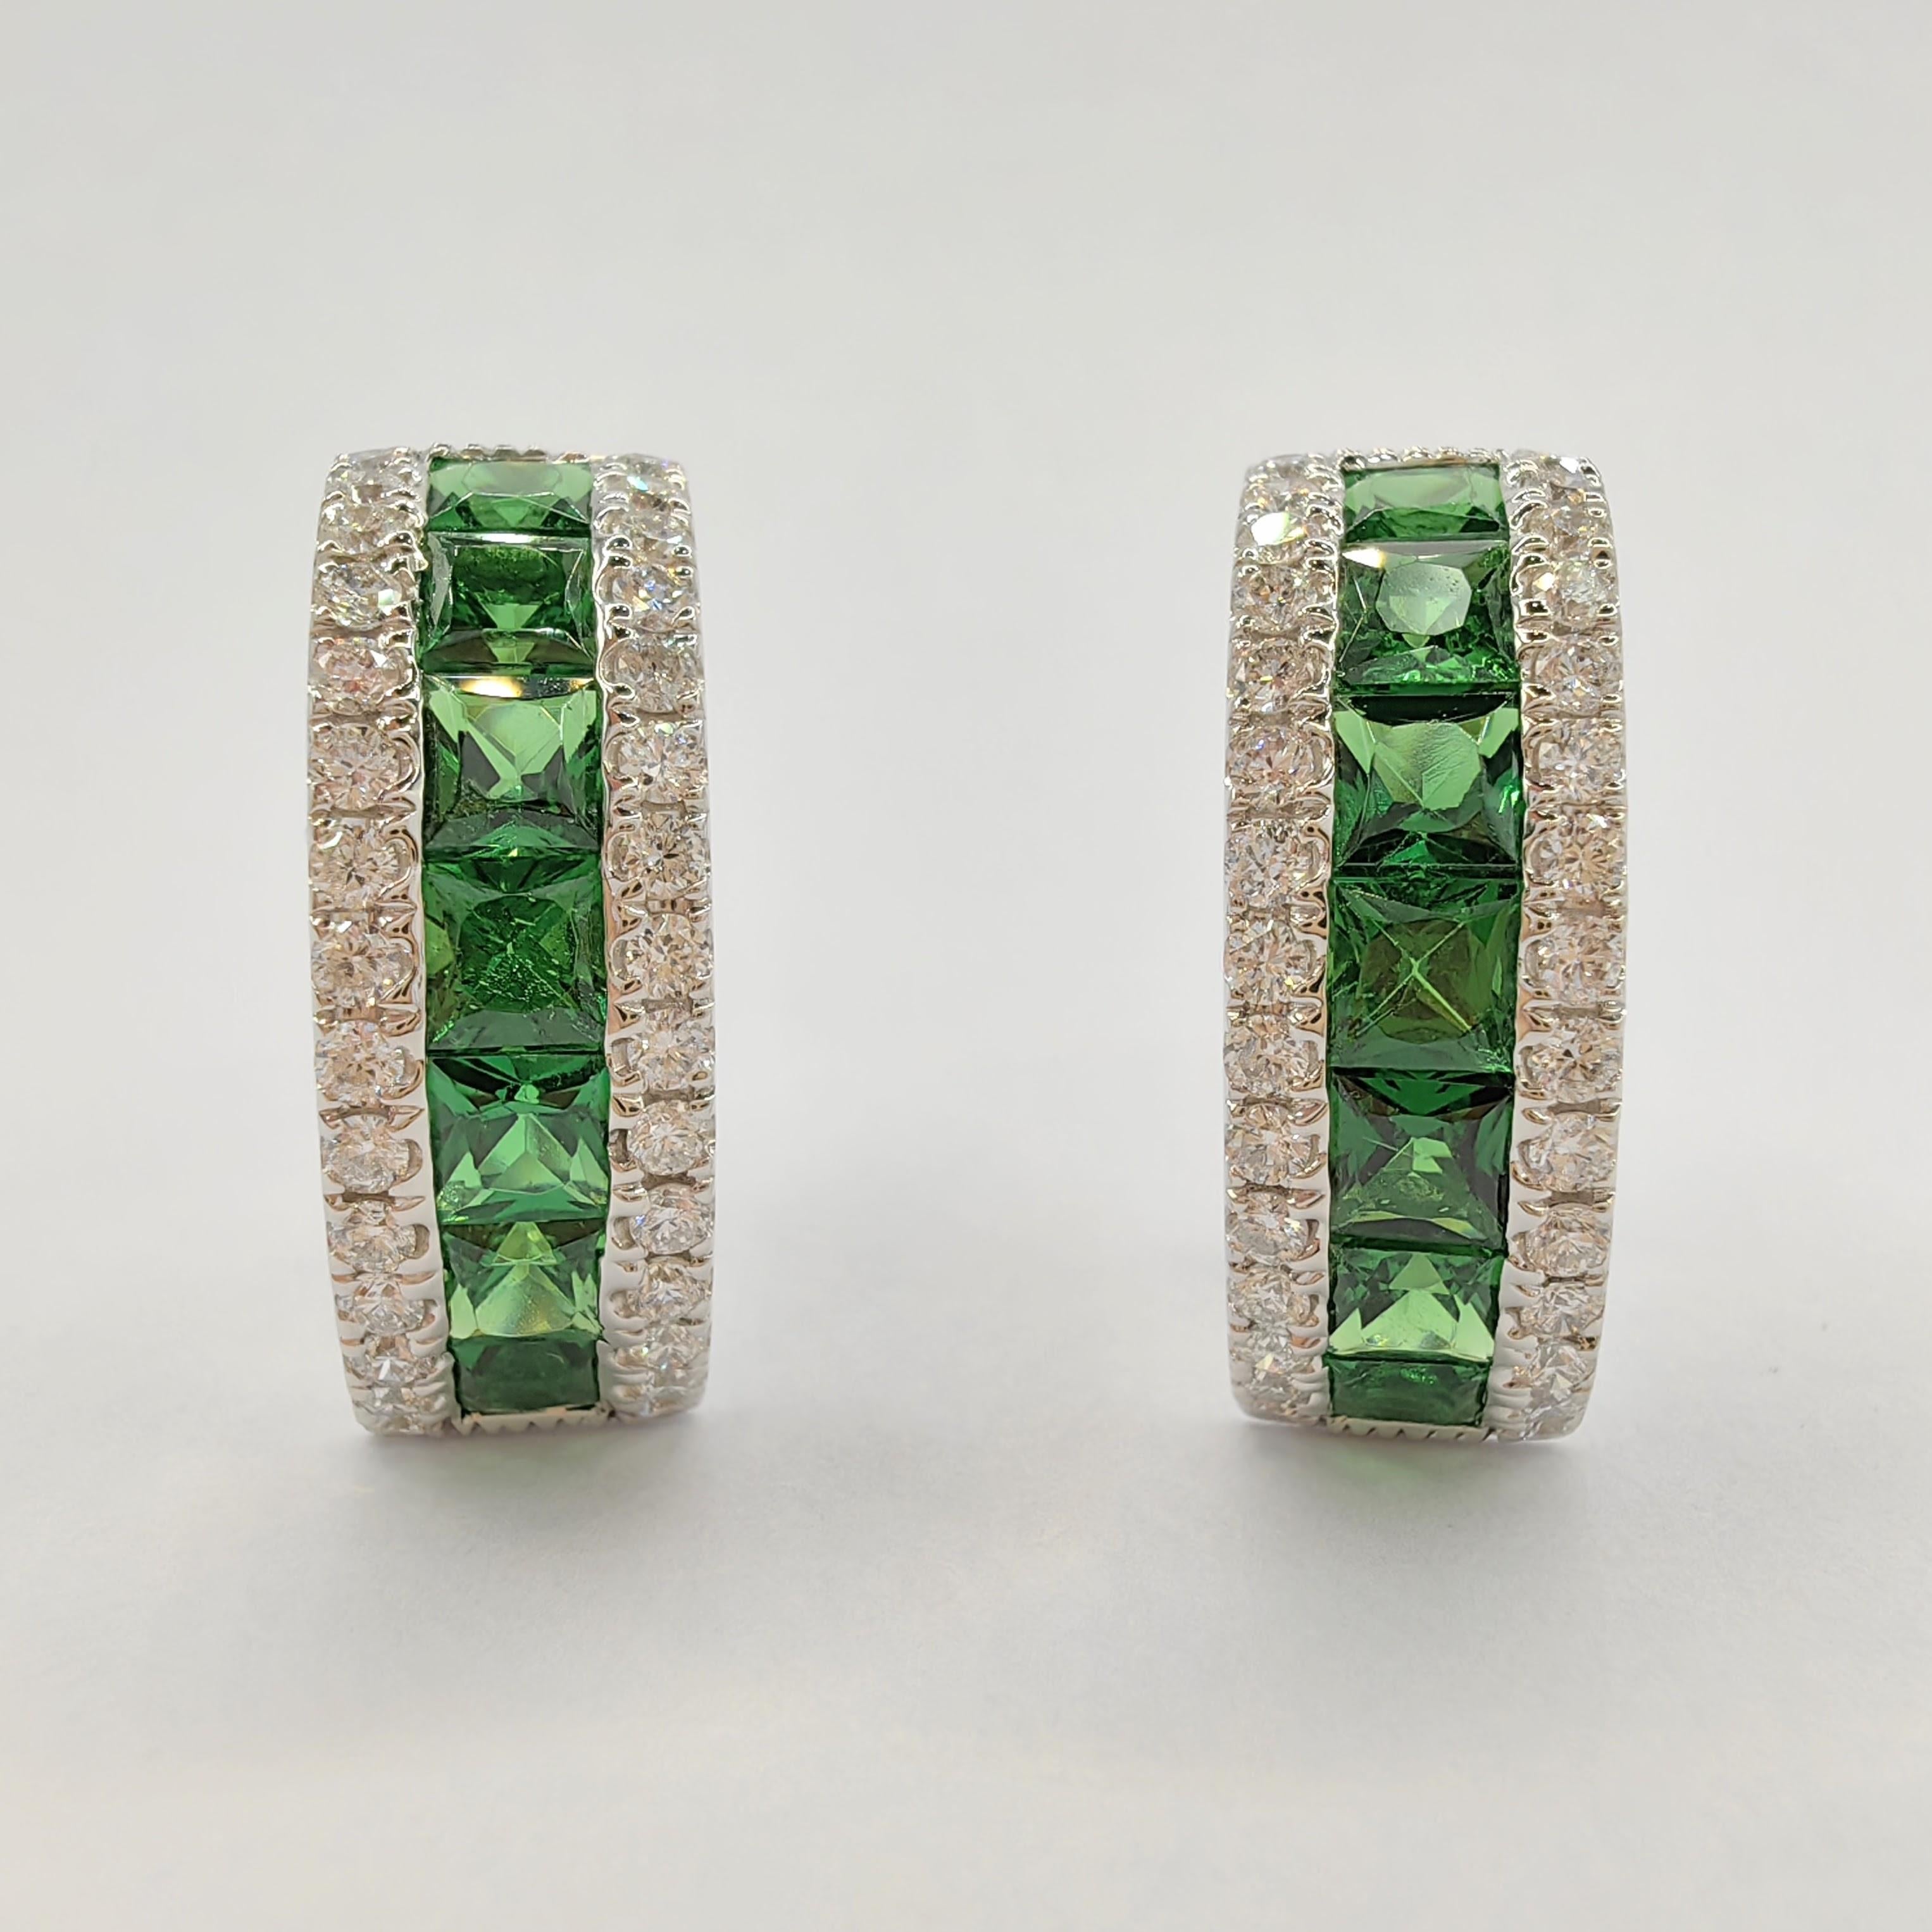 Introducing our stunning 2.6ct Deep Green Tsavorite Diamond Huggie Hoop Earrings in 18K White Gold. These earrings are a perfect blend of elegance and vibrancy, designed to add a touch of sophistication to any ensemble.

The focal point of these